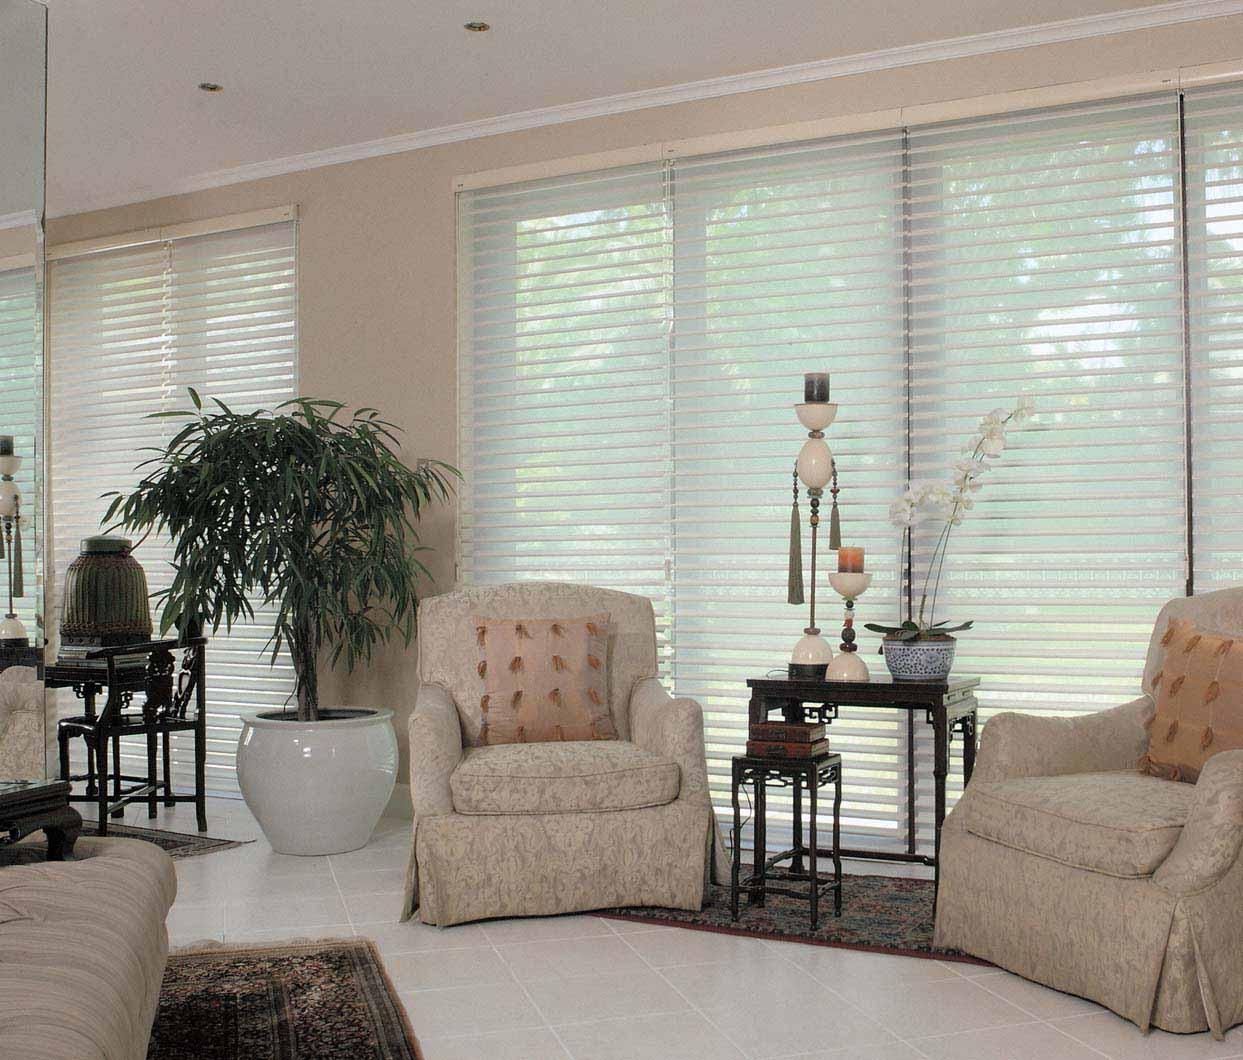 Details about   Sofidecora Window Roller Shades Room Blinds Blackout Office & Home VIVA ARCTIC 